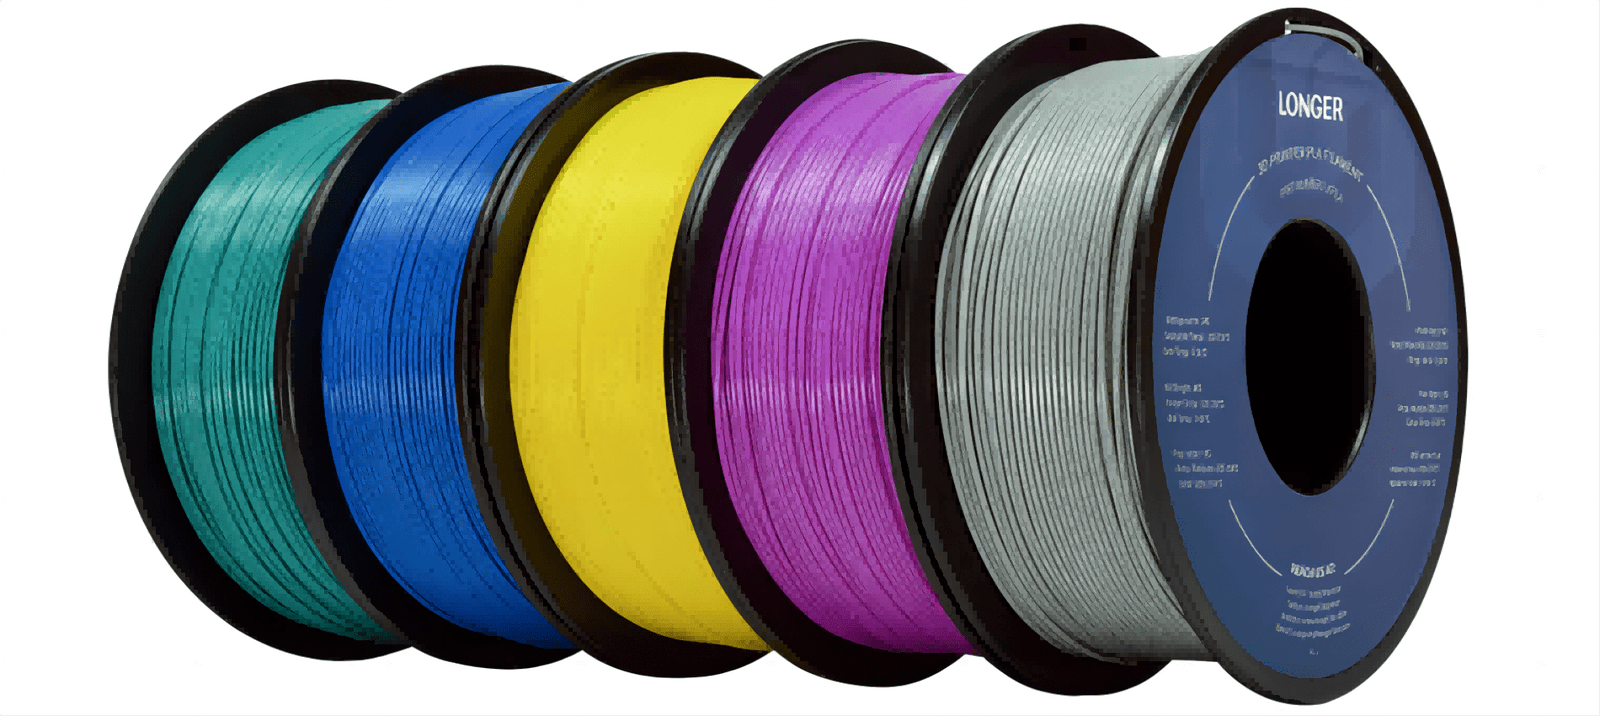 Differences between PETG and PLA in FDM 3D Printing - LONGER